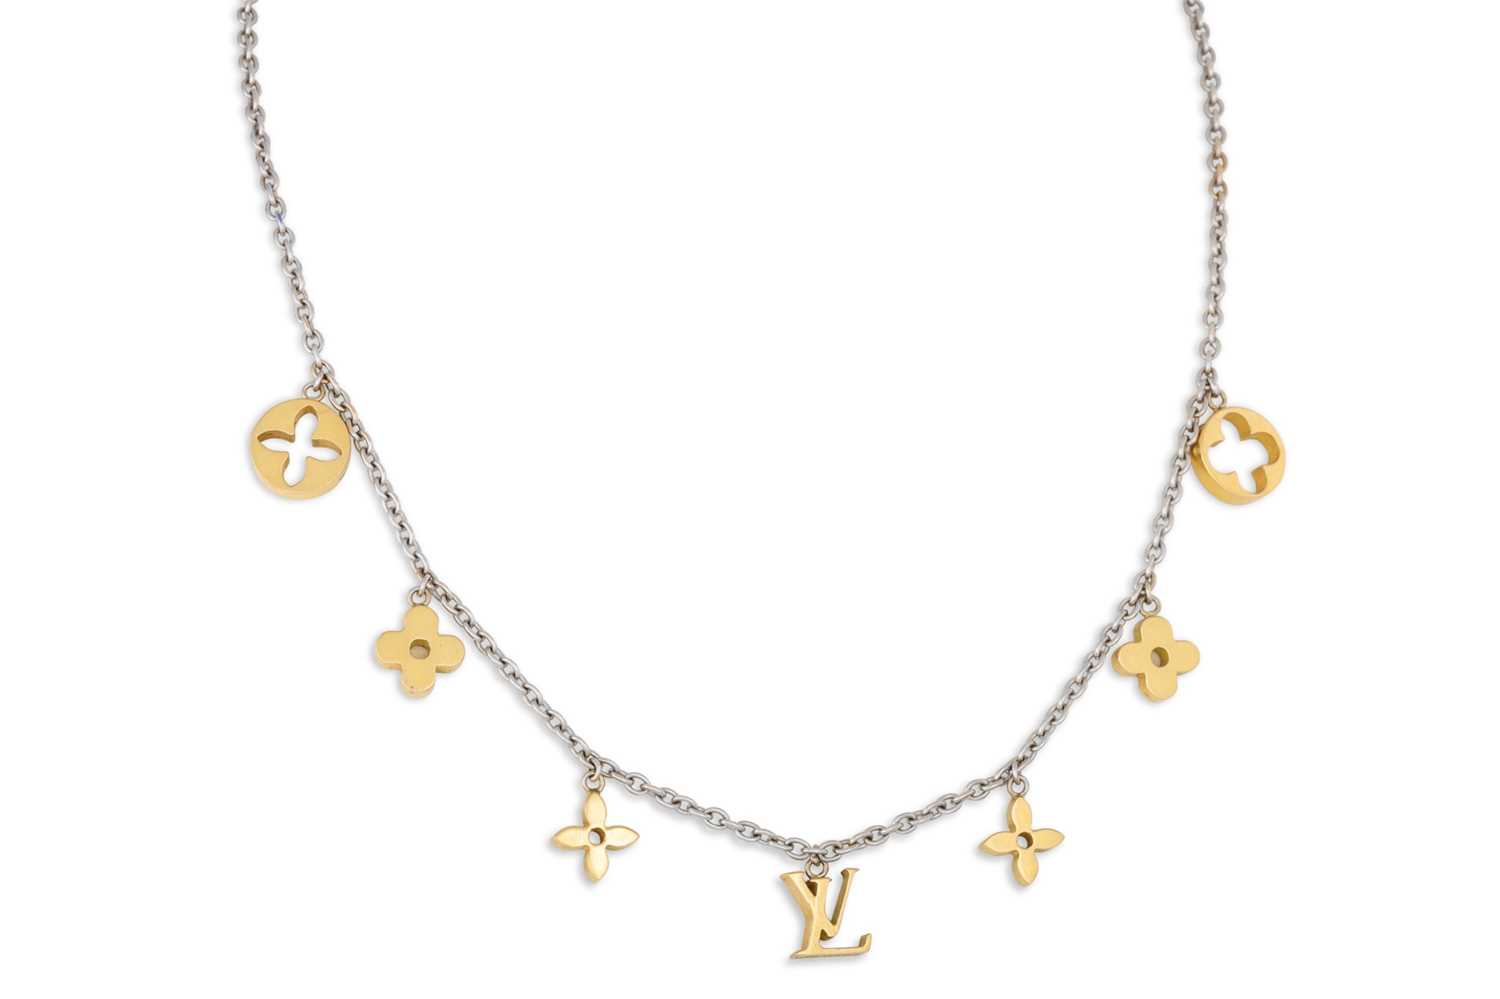 Sold at Auction: Louis Louis, Louis Vuitton Blooming Supple Charm